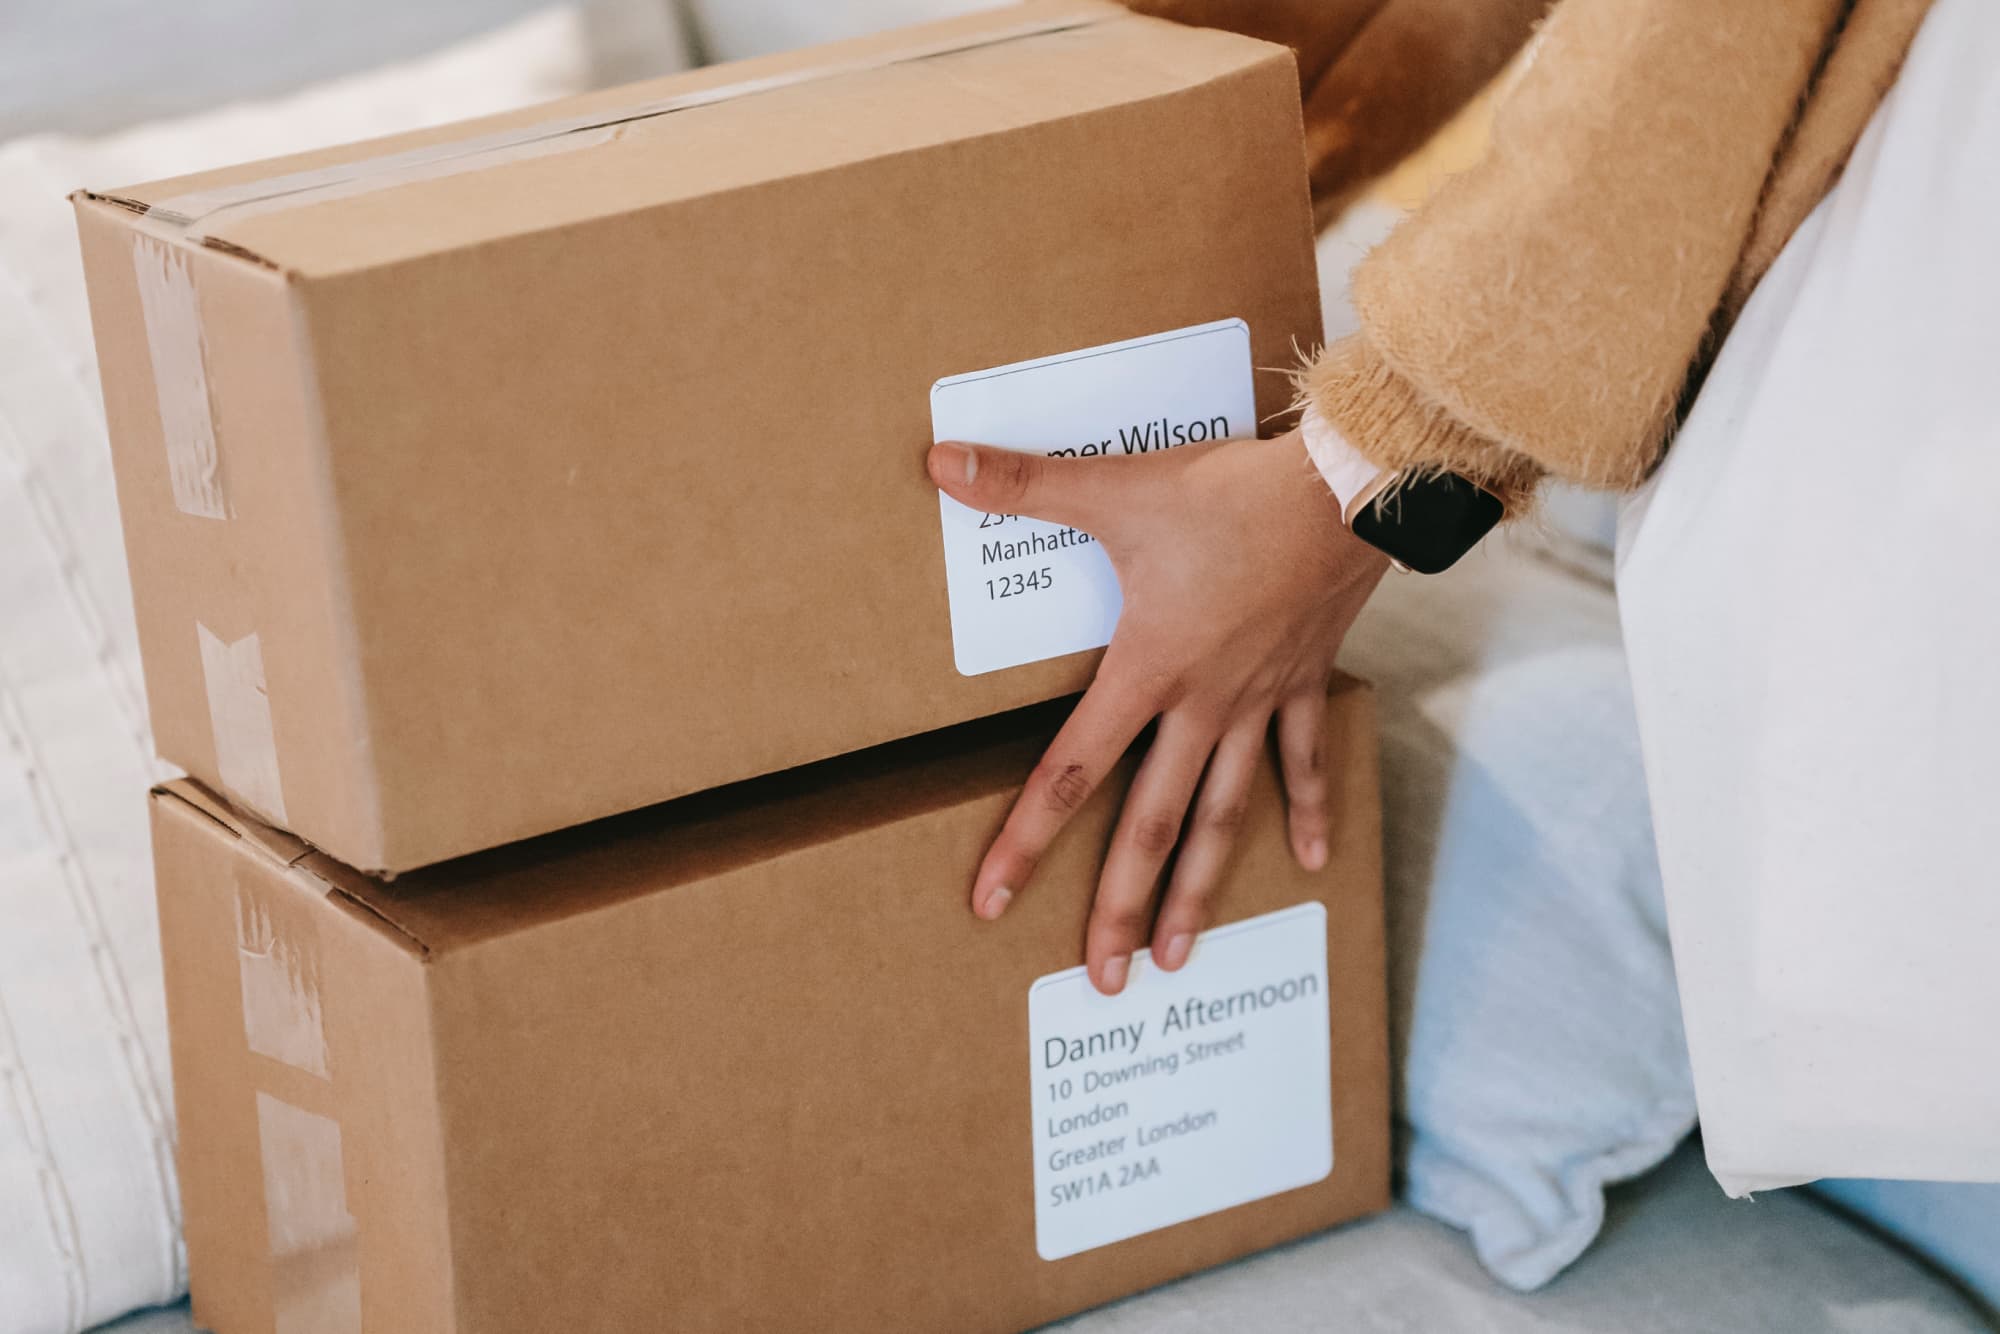 The surprising role of returns in the post-purchase experience